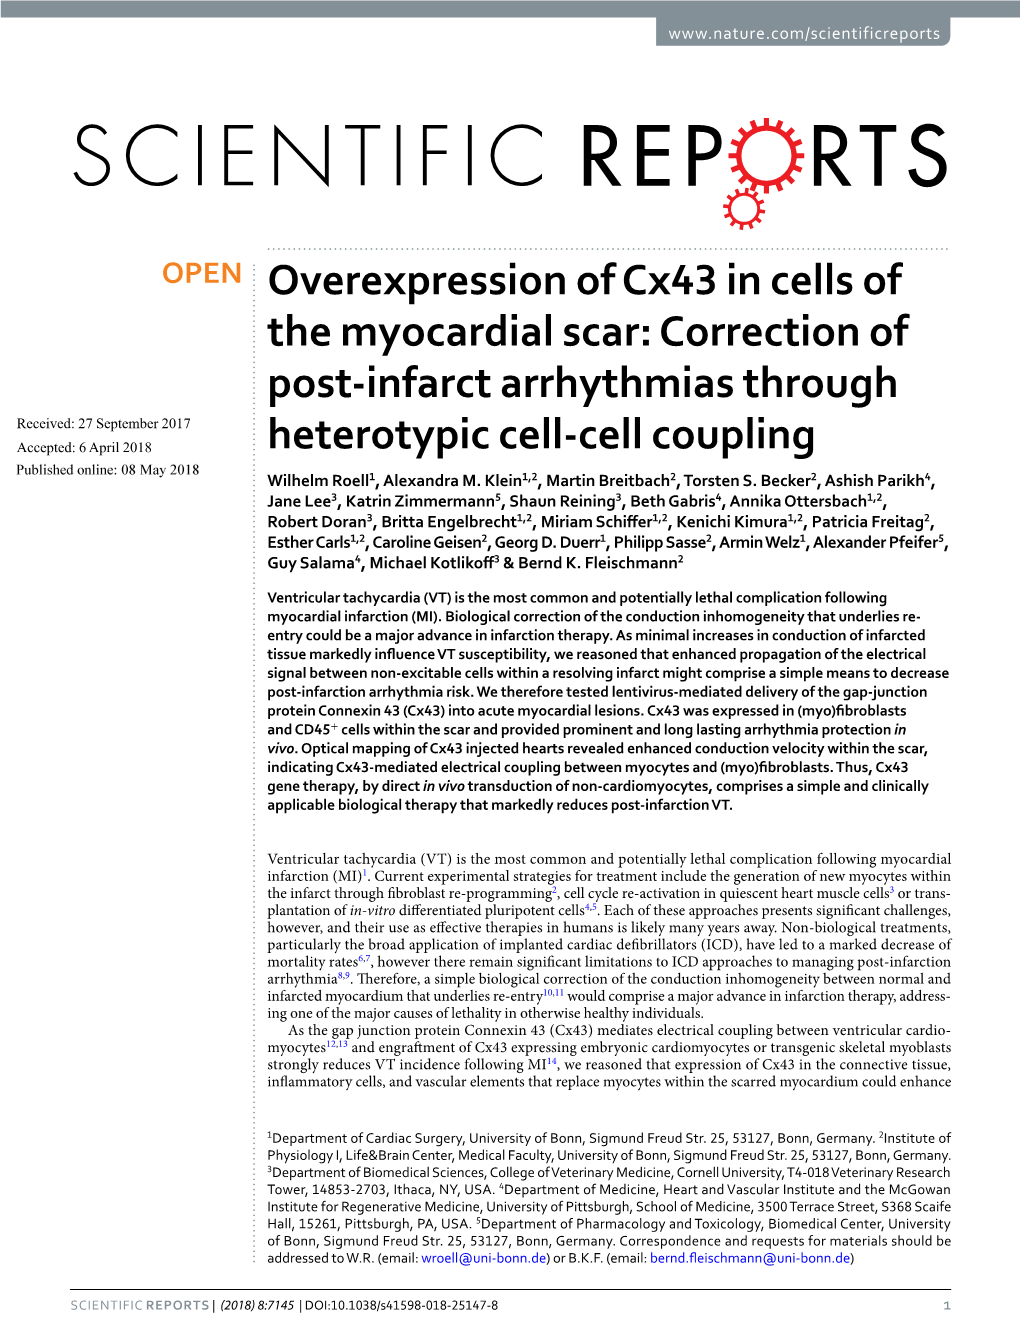 Overexpression of Cx43 in Cells of the Myocardial Scar